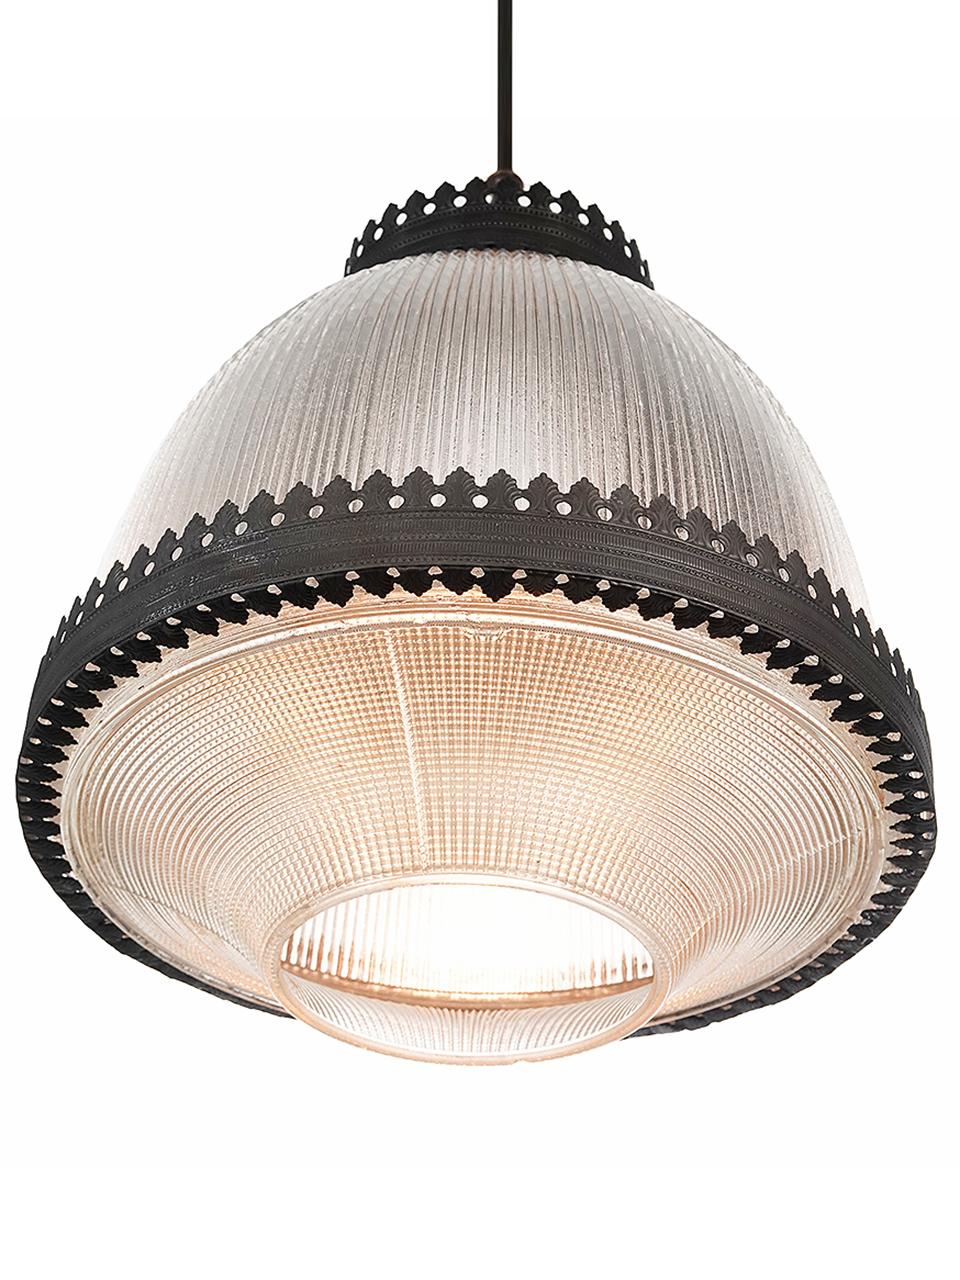 This is an interesting 2 part domed Holophane. There is an ornate crown as well as a decorative banding. This is the type of high style industrial lamp used in banks, lobbies and municipal buildings. The curved undercut section is very unique.